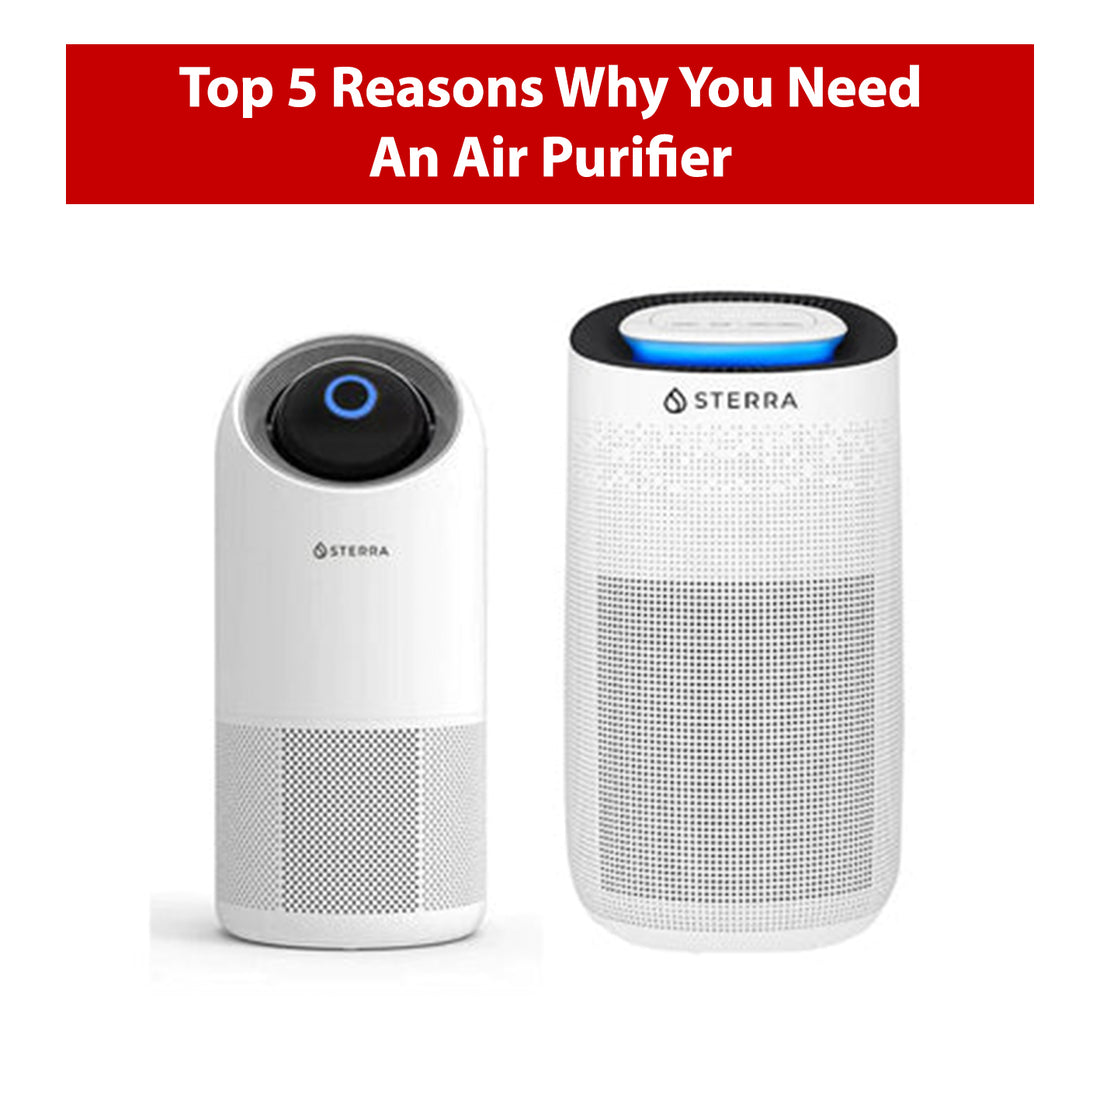 Top 5 Reasons Why You Need An Air Purifier